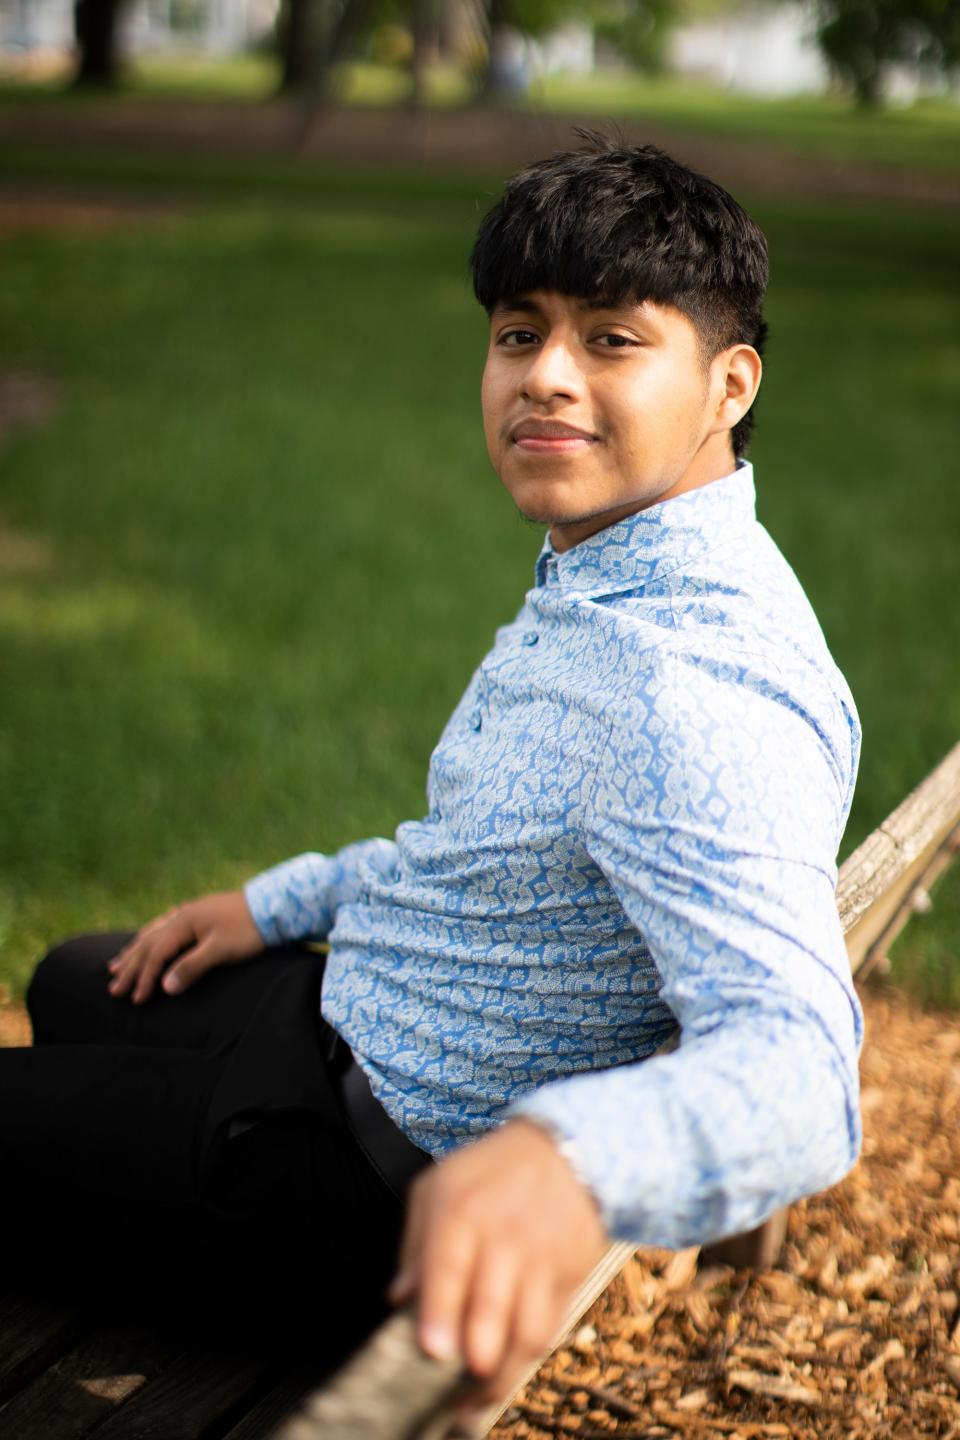 David Garcia Natividad is a Columbus City Schools graduate who will be attending Johns Hopkins University in the fall. He said he wants to use his education in electrical and computer engineering to help reduce how much people are connected to their devices and electronic stimuli.